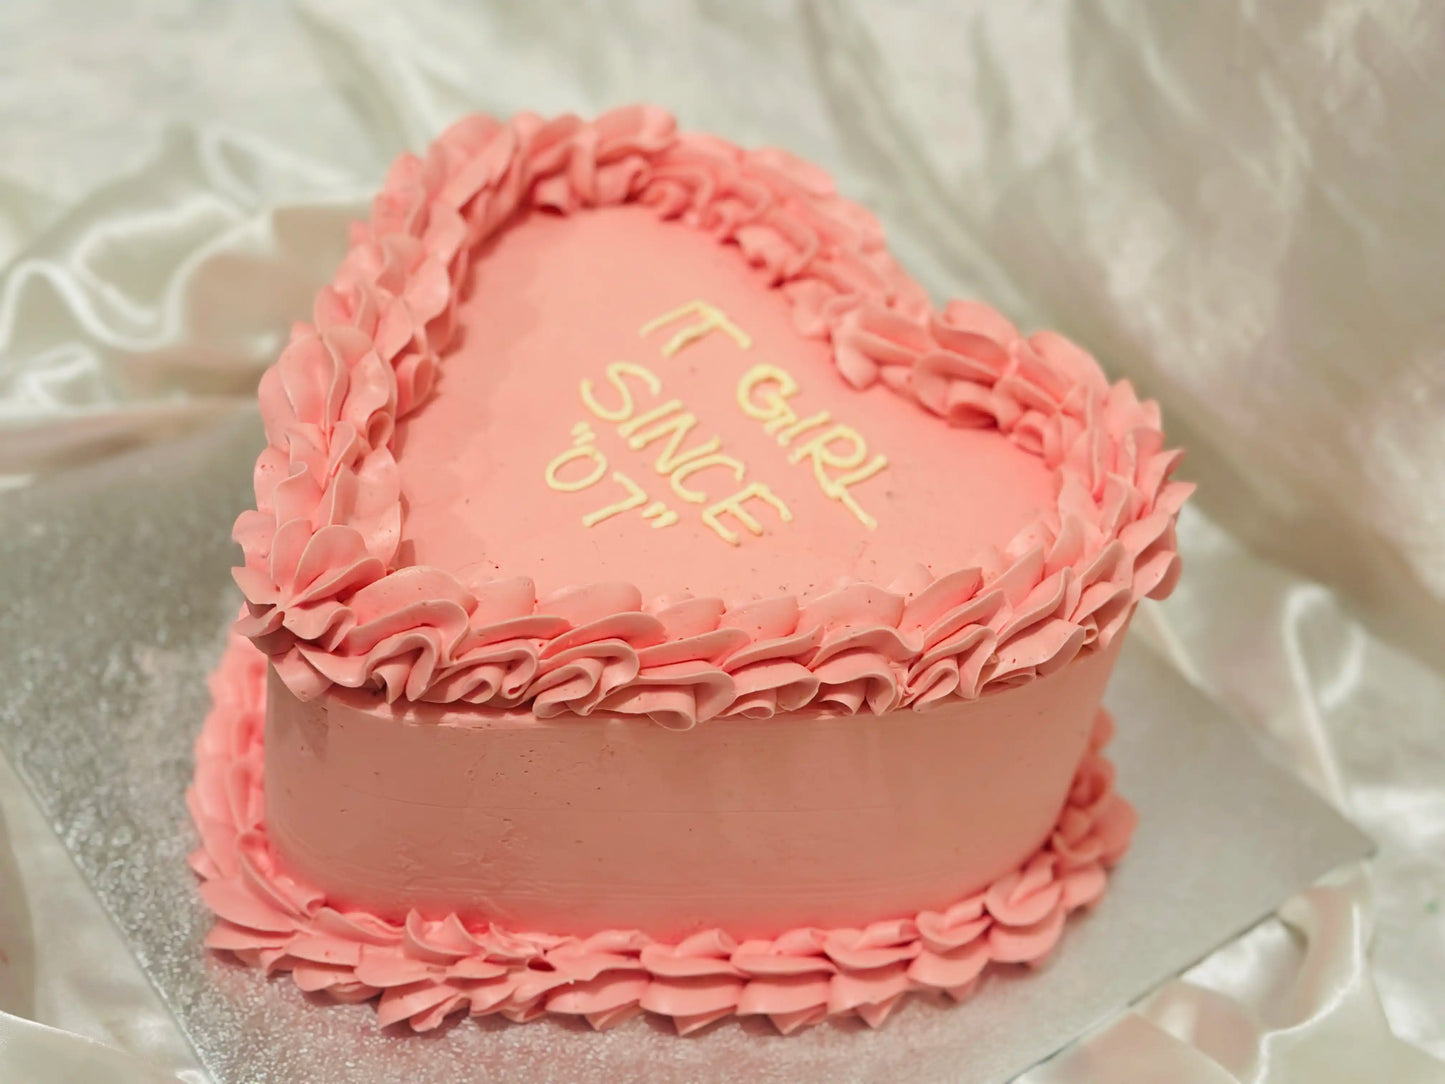 Gourmet heart cake with rich layers and silky icing, a luxurious treat available in East Ham - CakeTrays.co.uk.